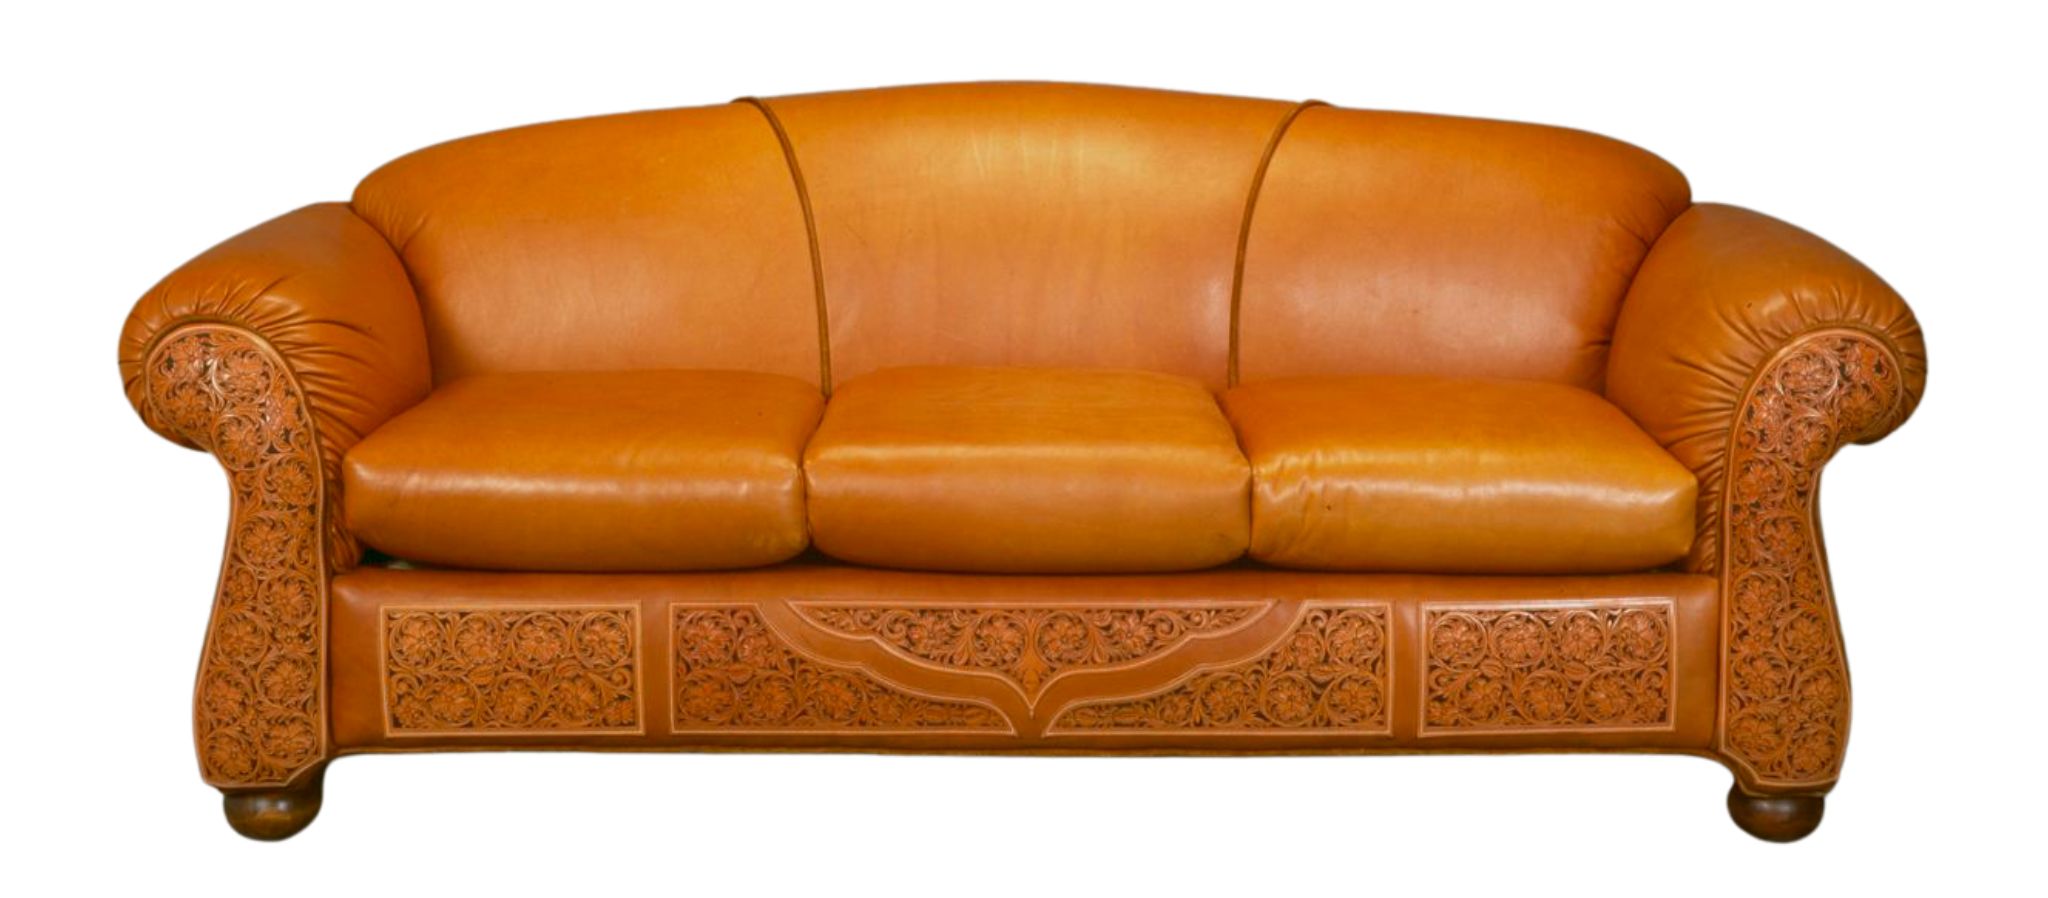 Leather sofa with tooled kick plate and arms